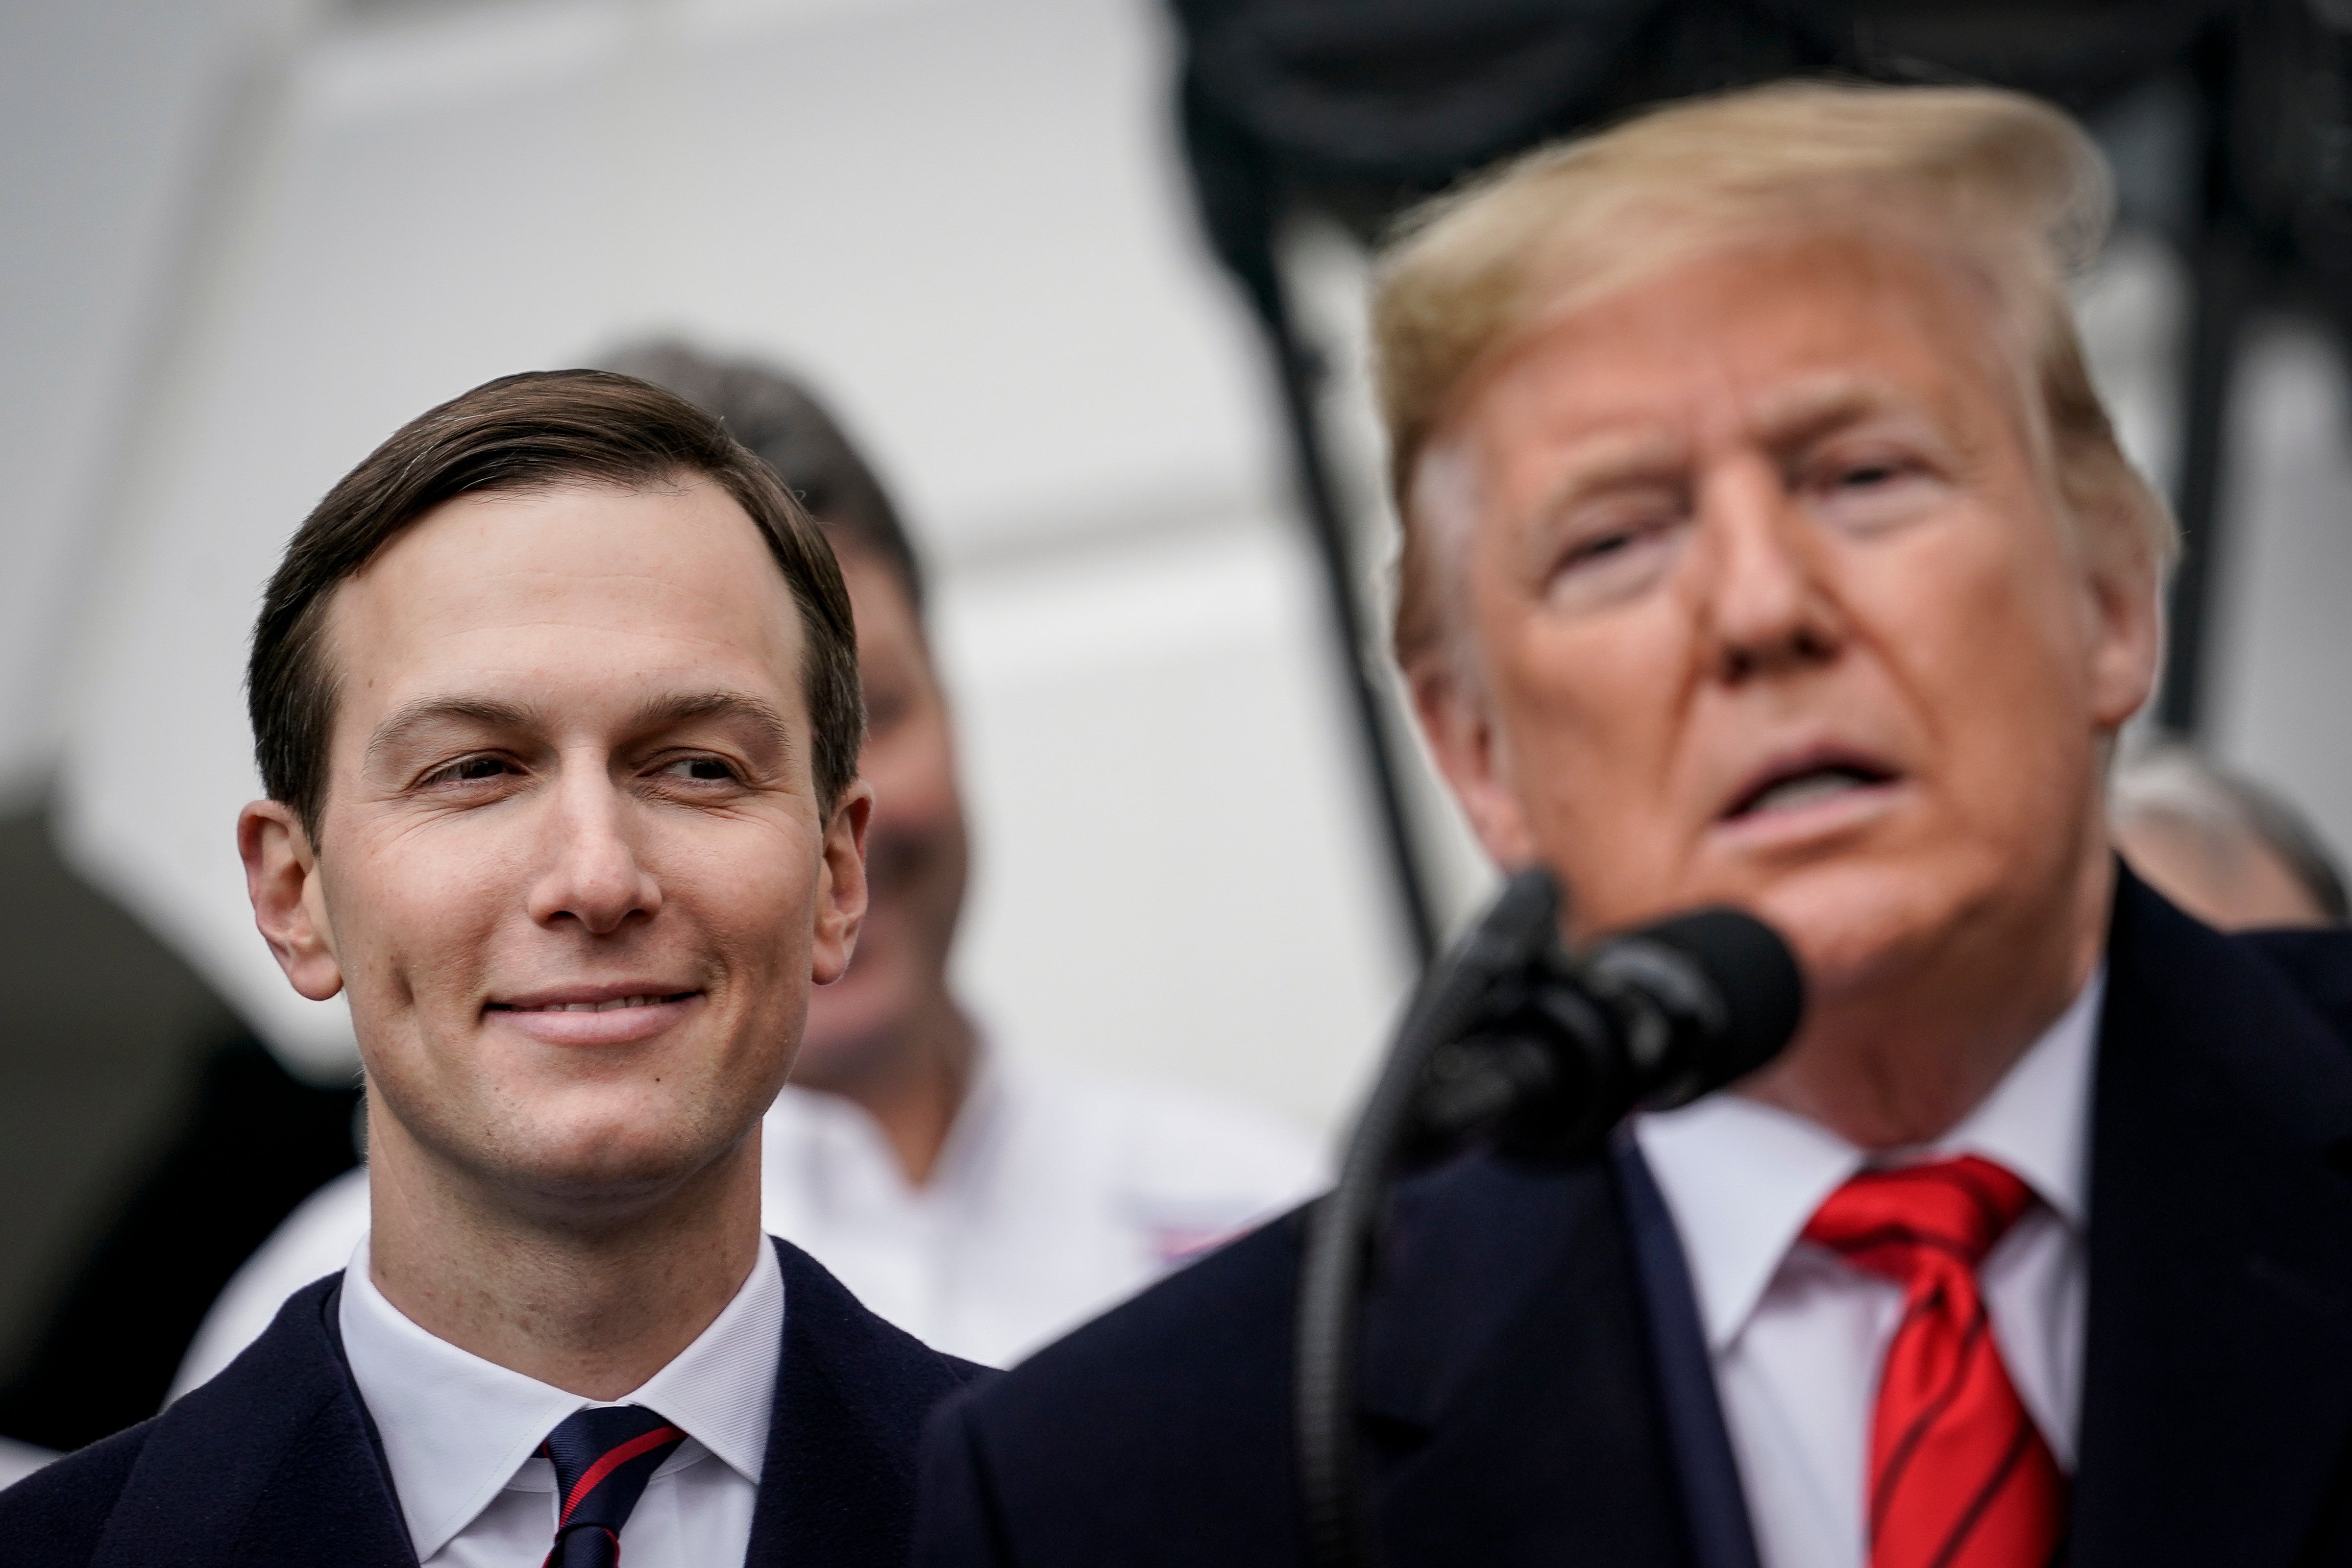 In an op-ed, Kushner credits himself and his father-in-law Donald Trump for giving the US a ‘strong hand’ in dealing with Iran